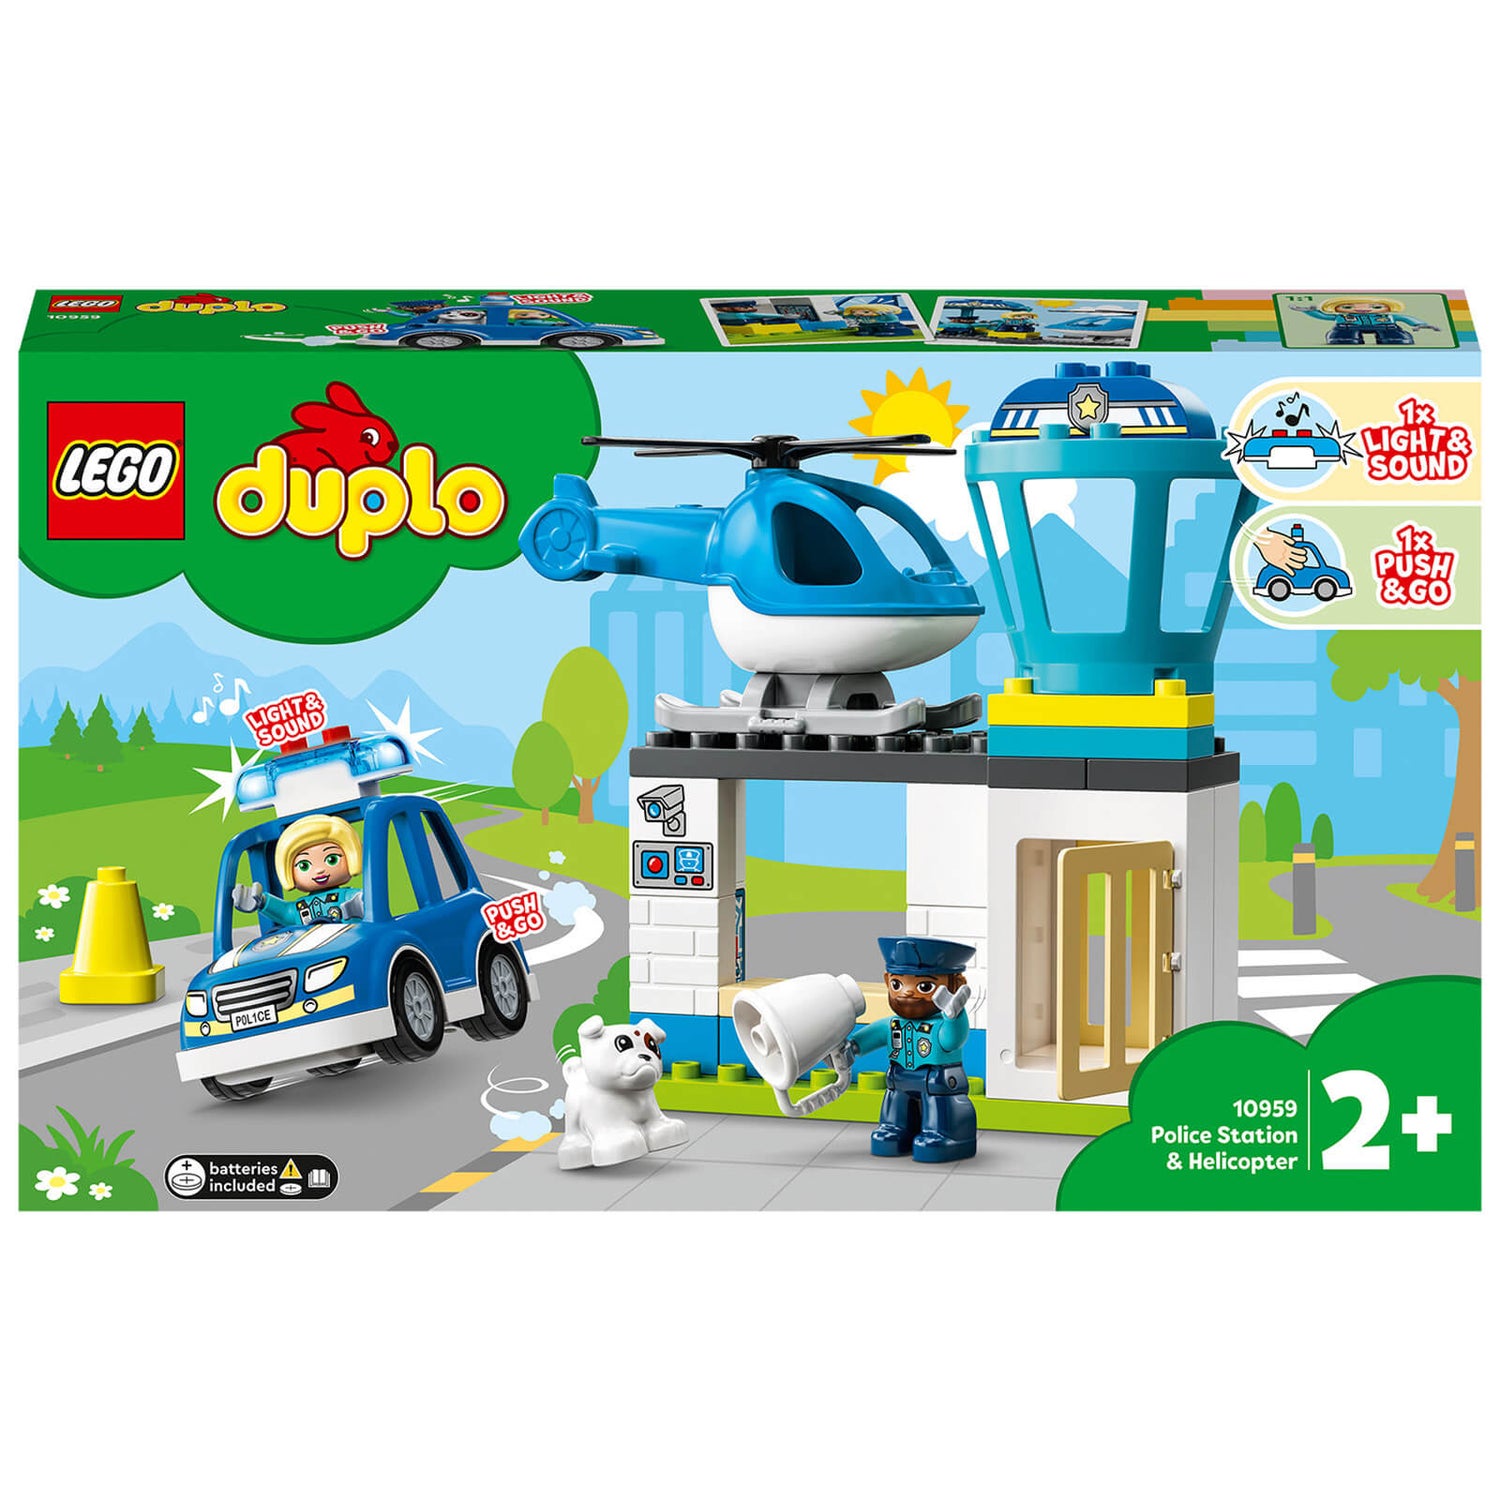 LEGO DUPLO Rescue Police Station & Helicopter Toy Set (10959)